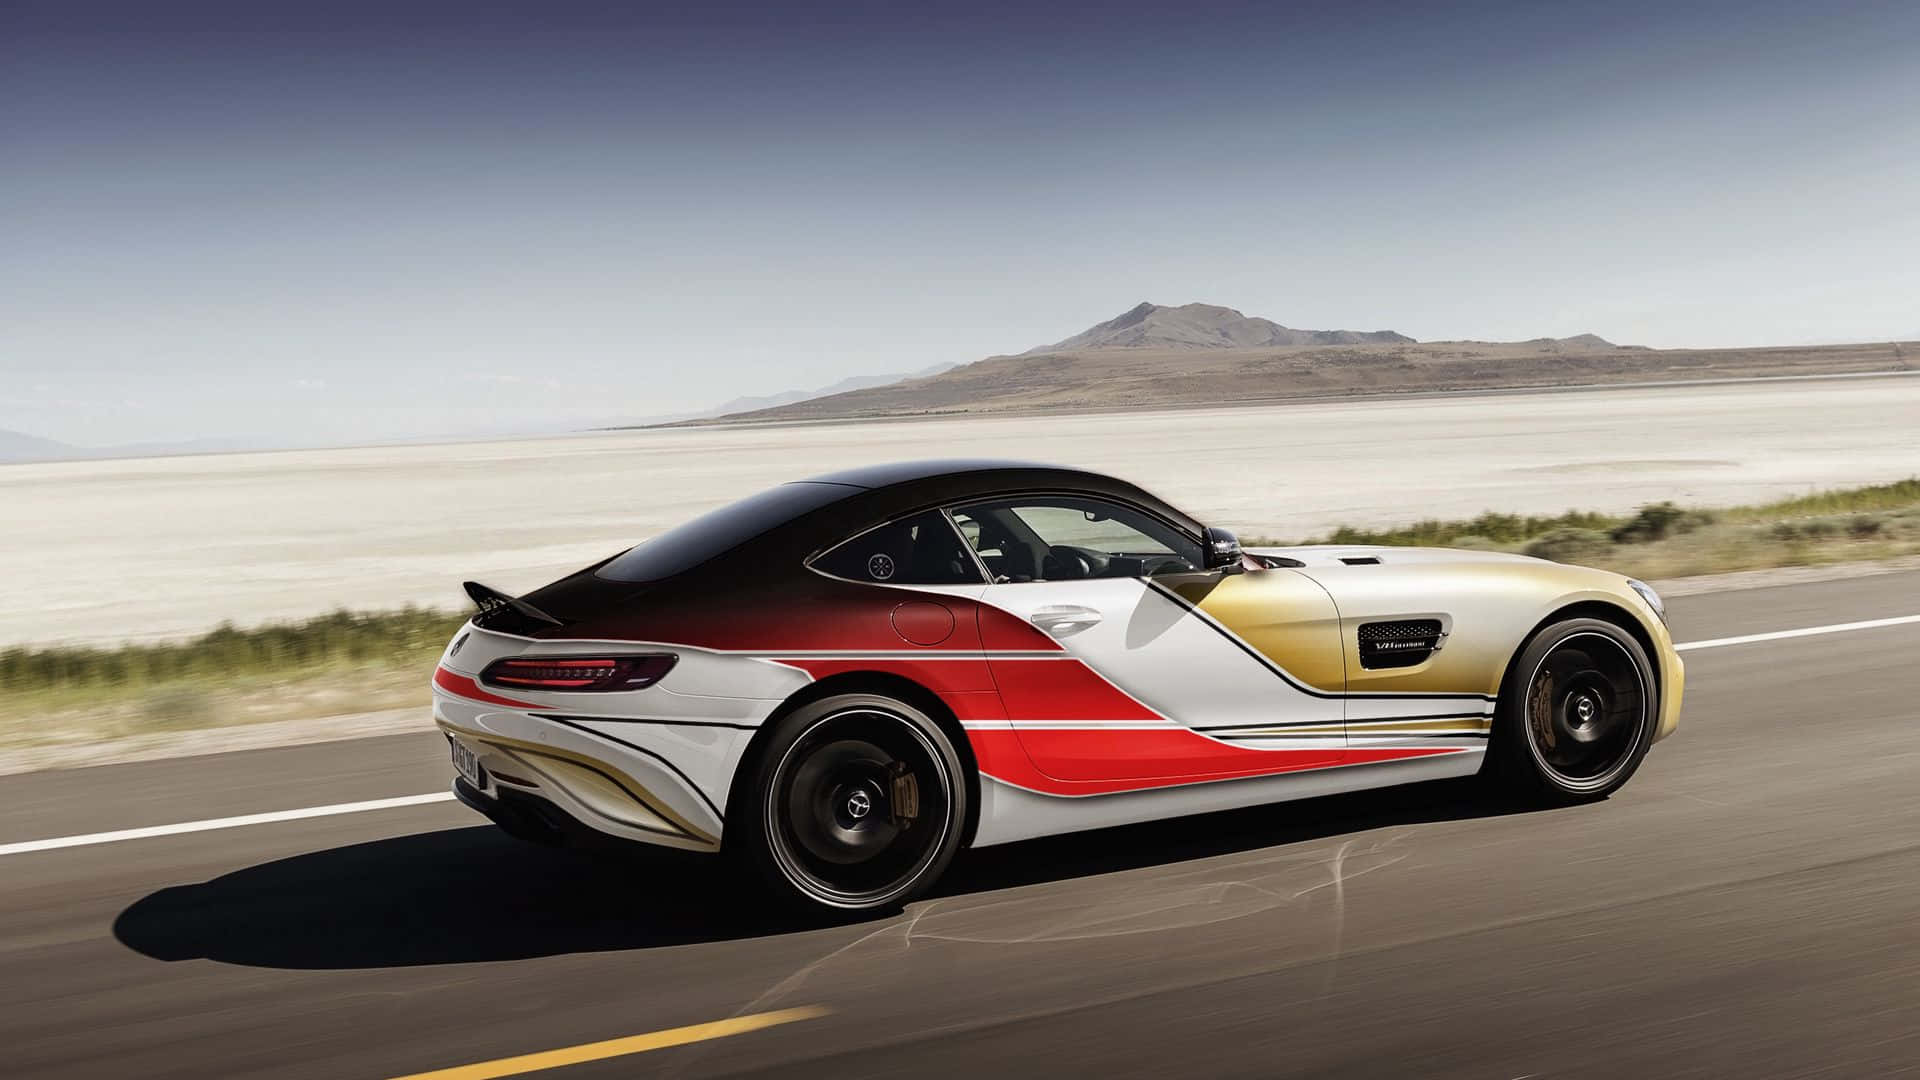 Luxury and Power Unite in the Mercedes-Benz Car Wallpaper